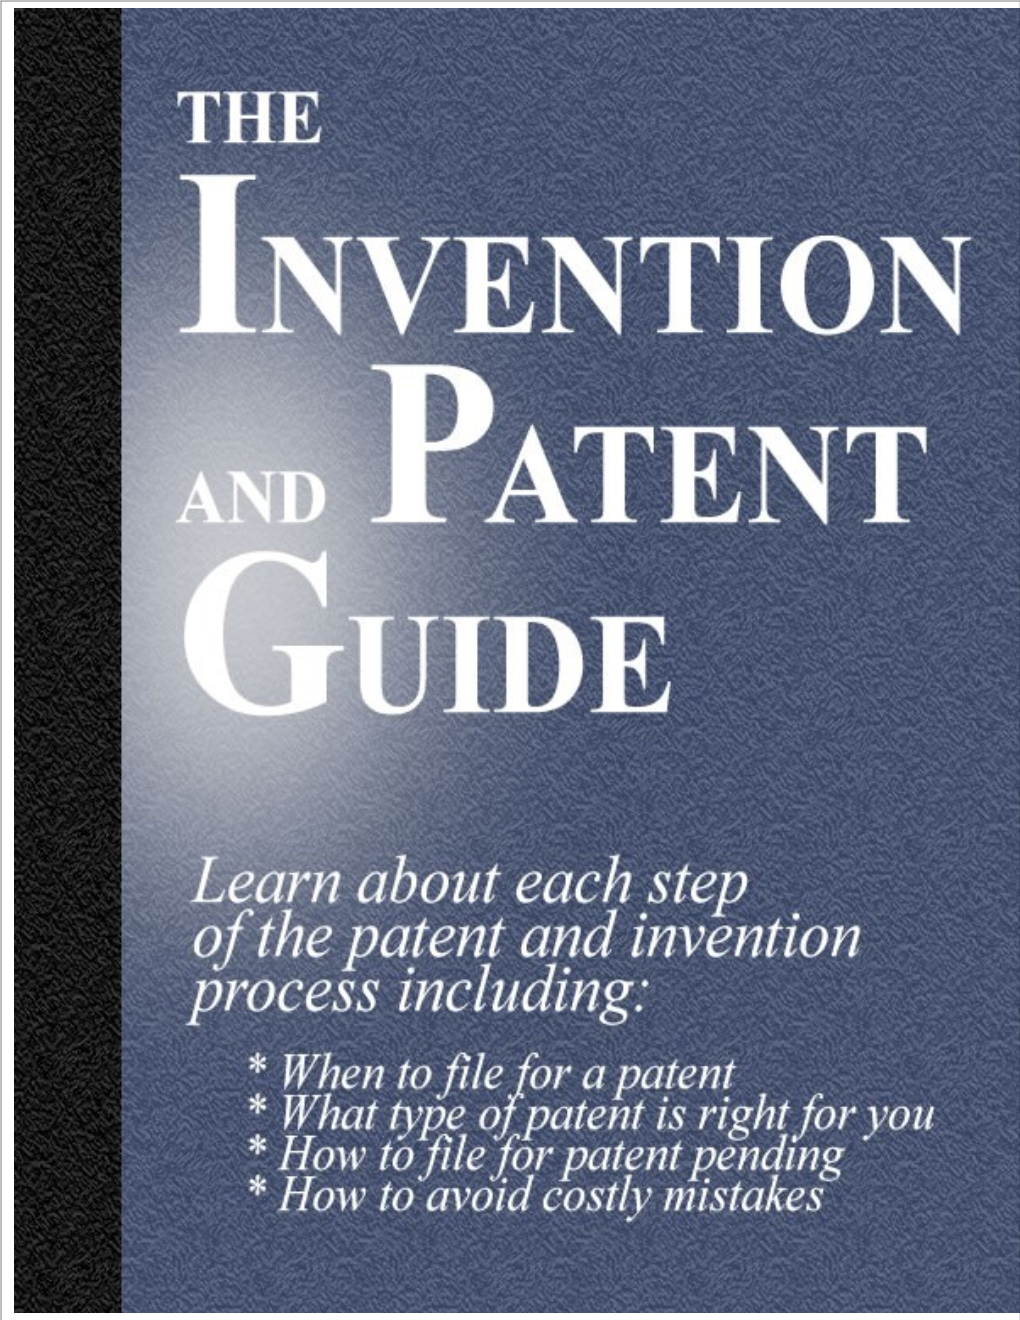 The Truth About Selling Your Patent Or Idea ($29